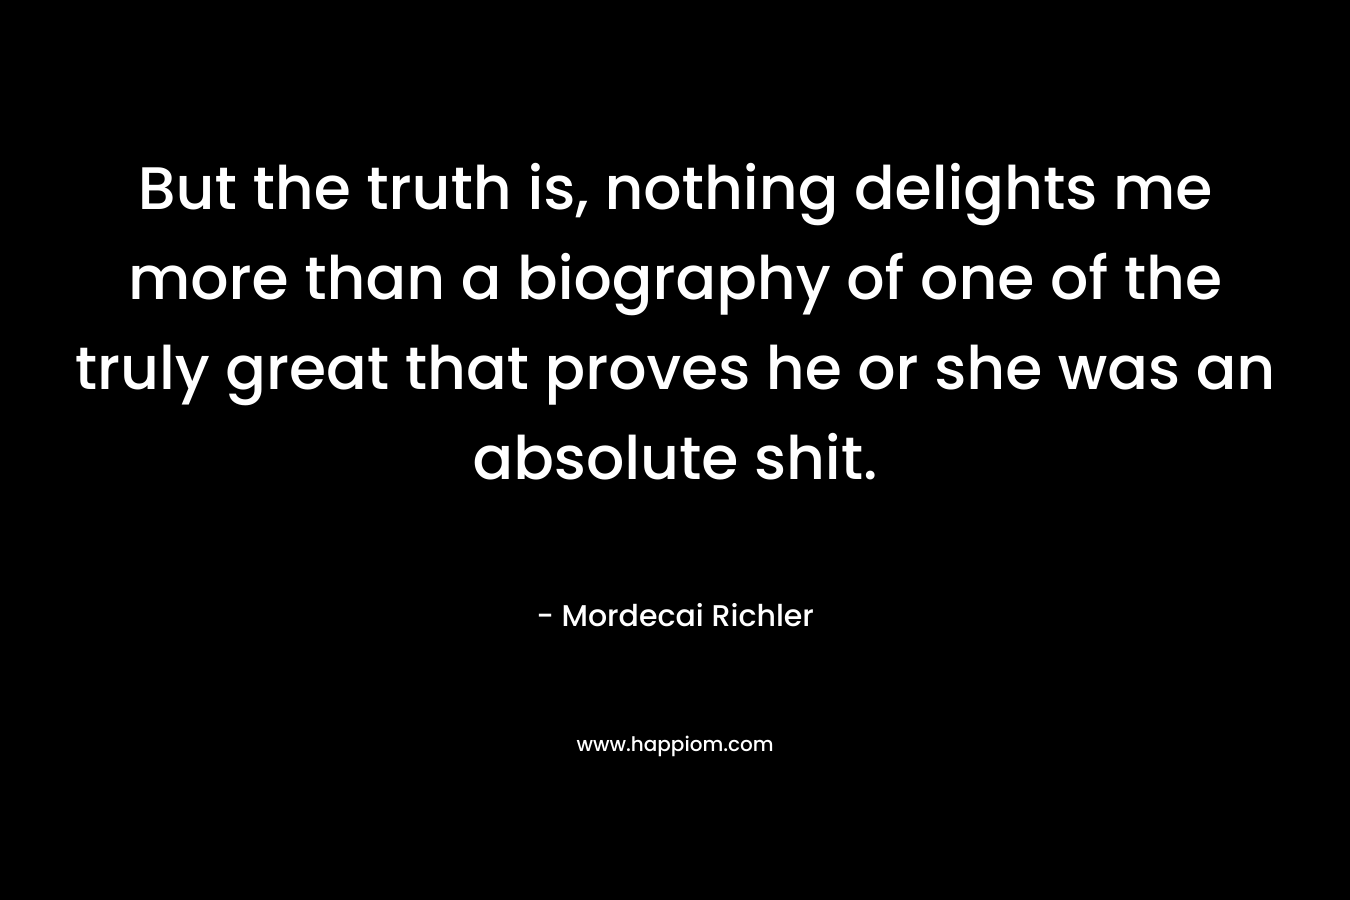 But the truth is, nothing delights me more than a biography of one of the truly great that proves he or she was an absolute shit. – Mordecai Richler